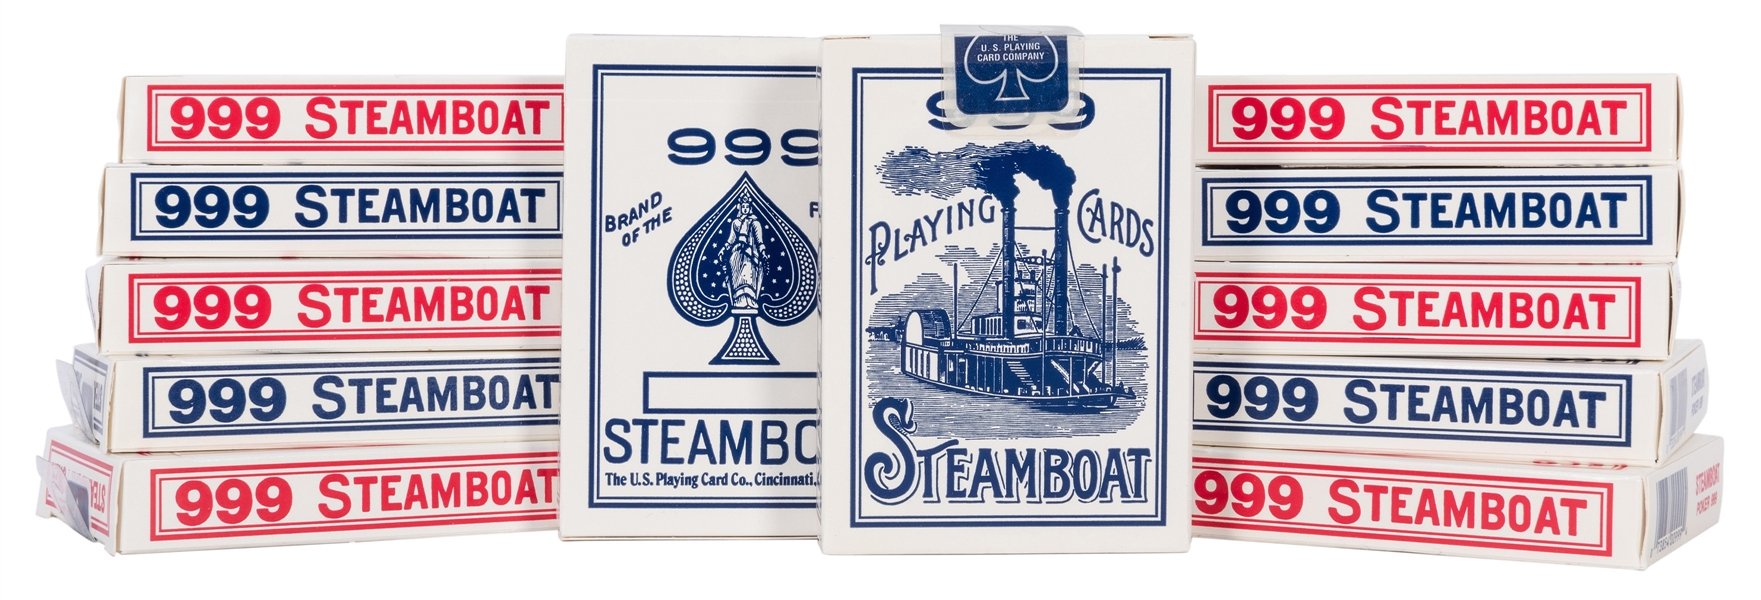  Brick of Steamboat 999 Playing Cards.